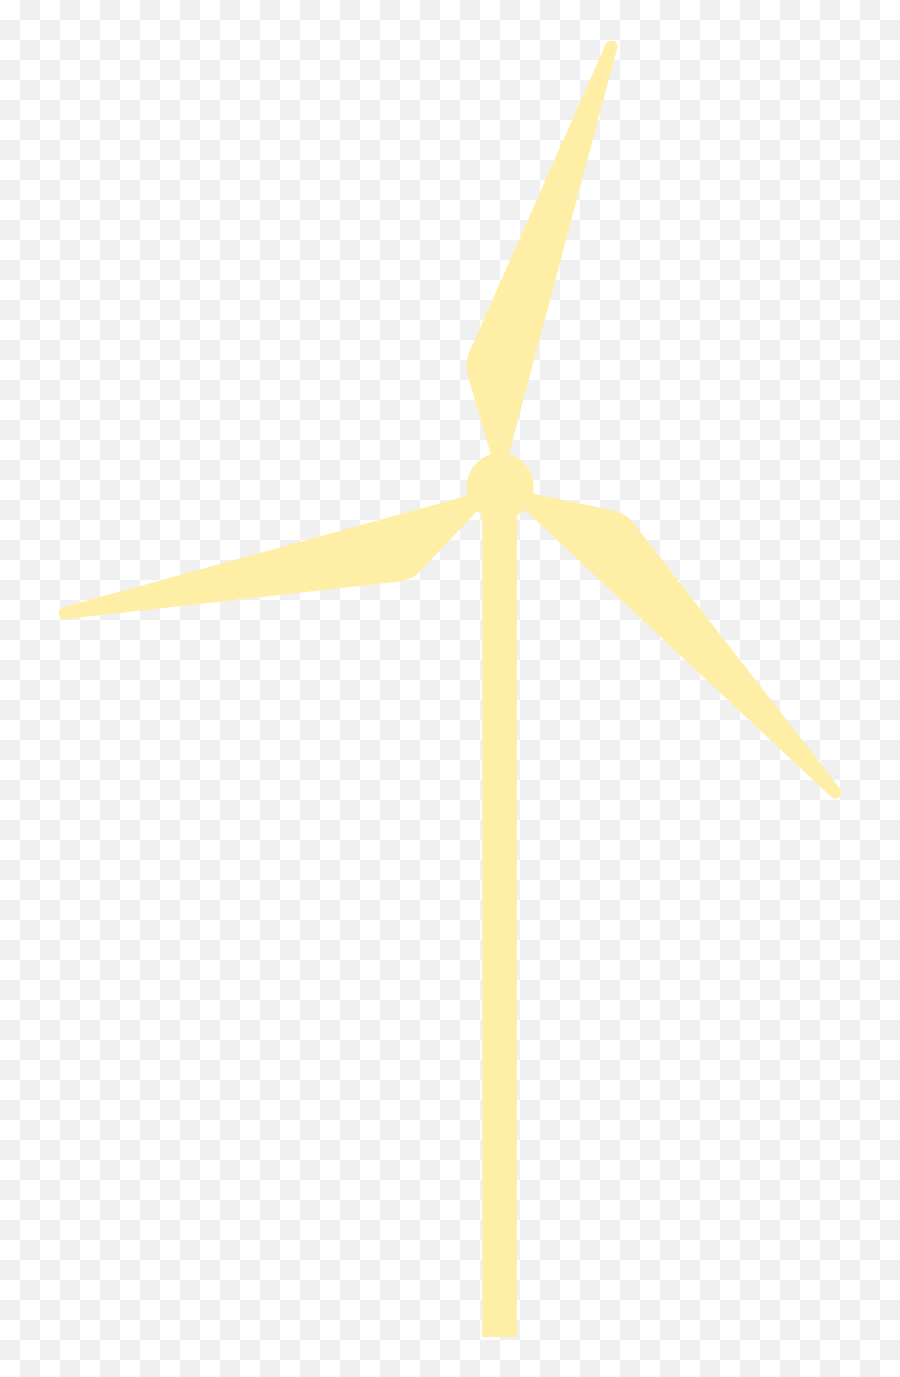 Wind Turbine Illustration In Png Svg - Vertical,Wind Farm Icon